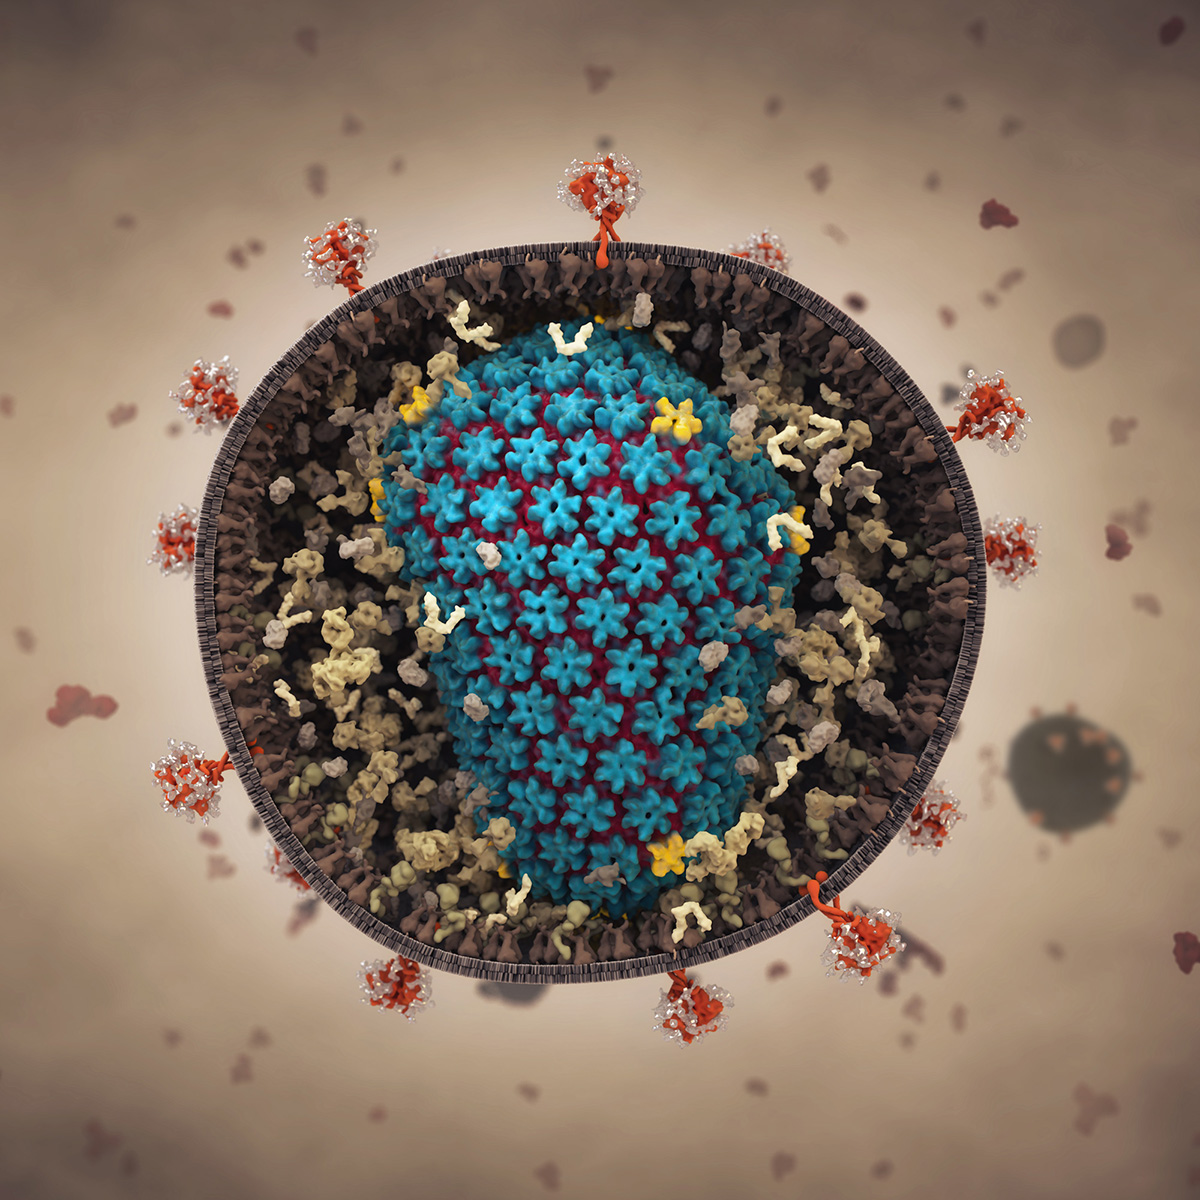 The genetic material of the HIV virus is encased in multiple structures that hide it from the host immune system.